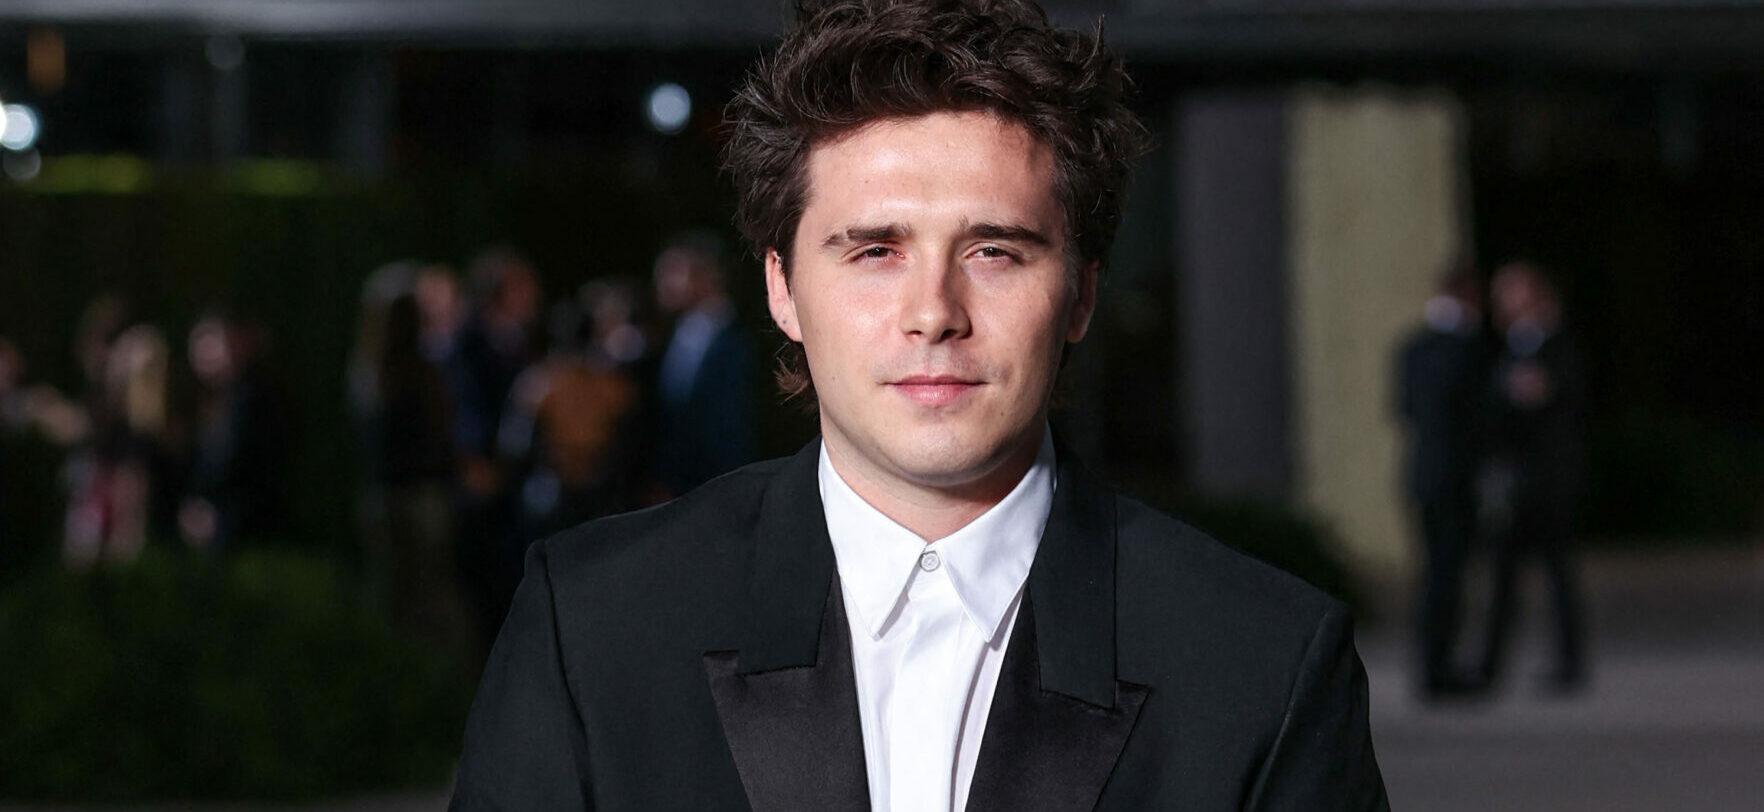 Brooklyn Beckham Gives Thirsty View After Having ‘Nice Little Ice Bath’